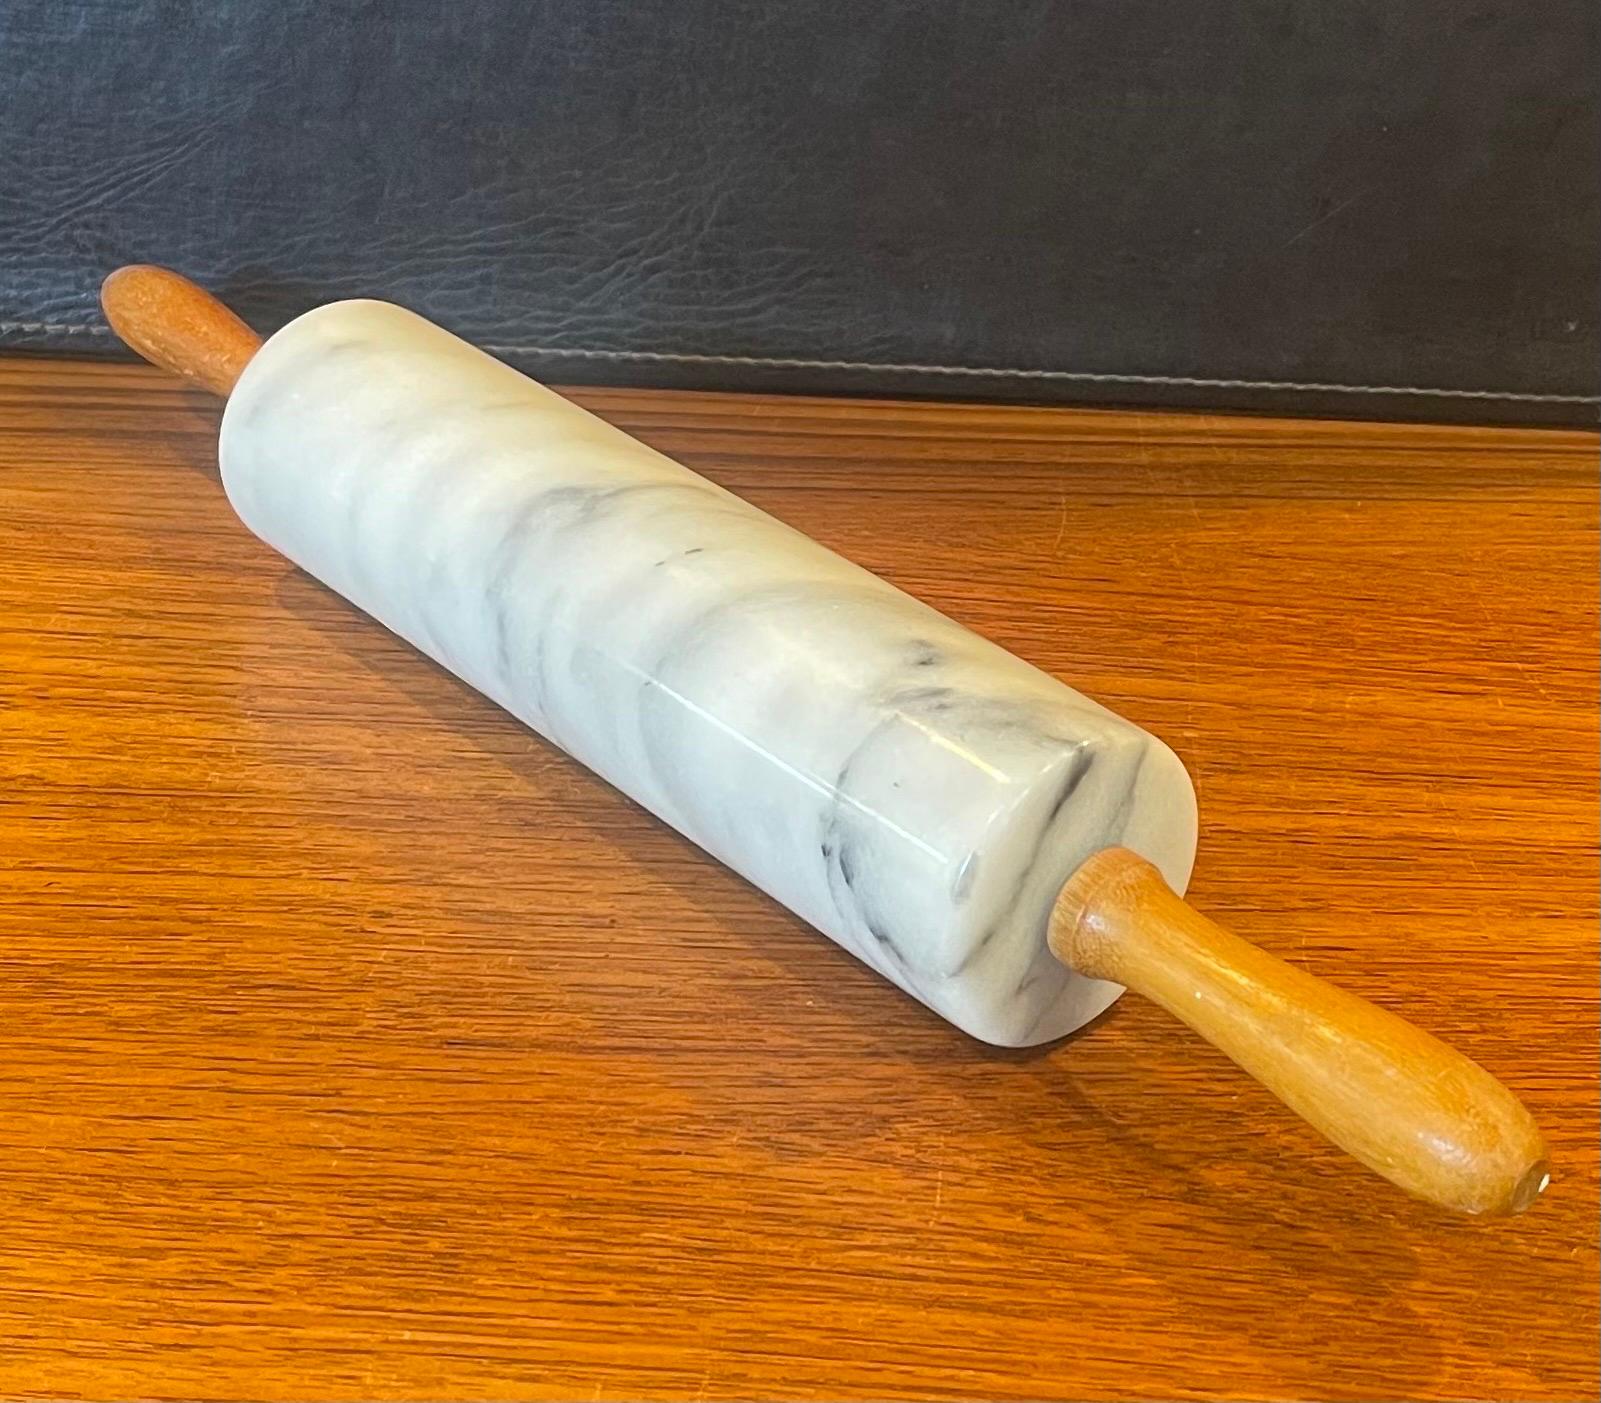 Vintage Carrara marble rolling pin, circa 1980s. The piece is in very good vintage condition with wood handles and measures 2.5